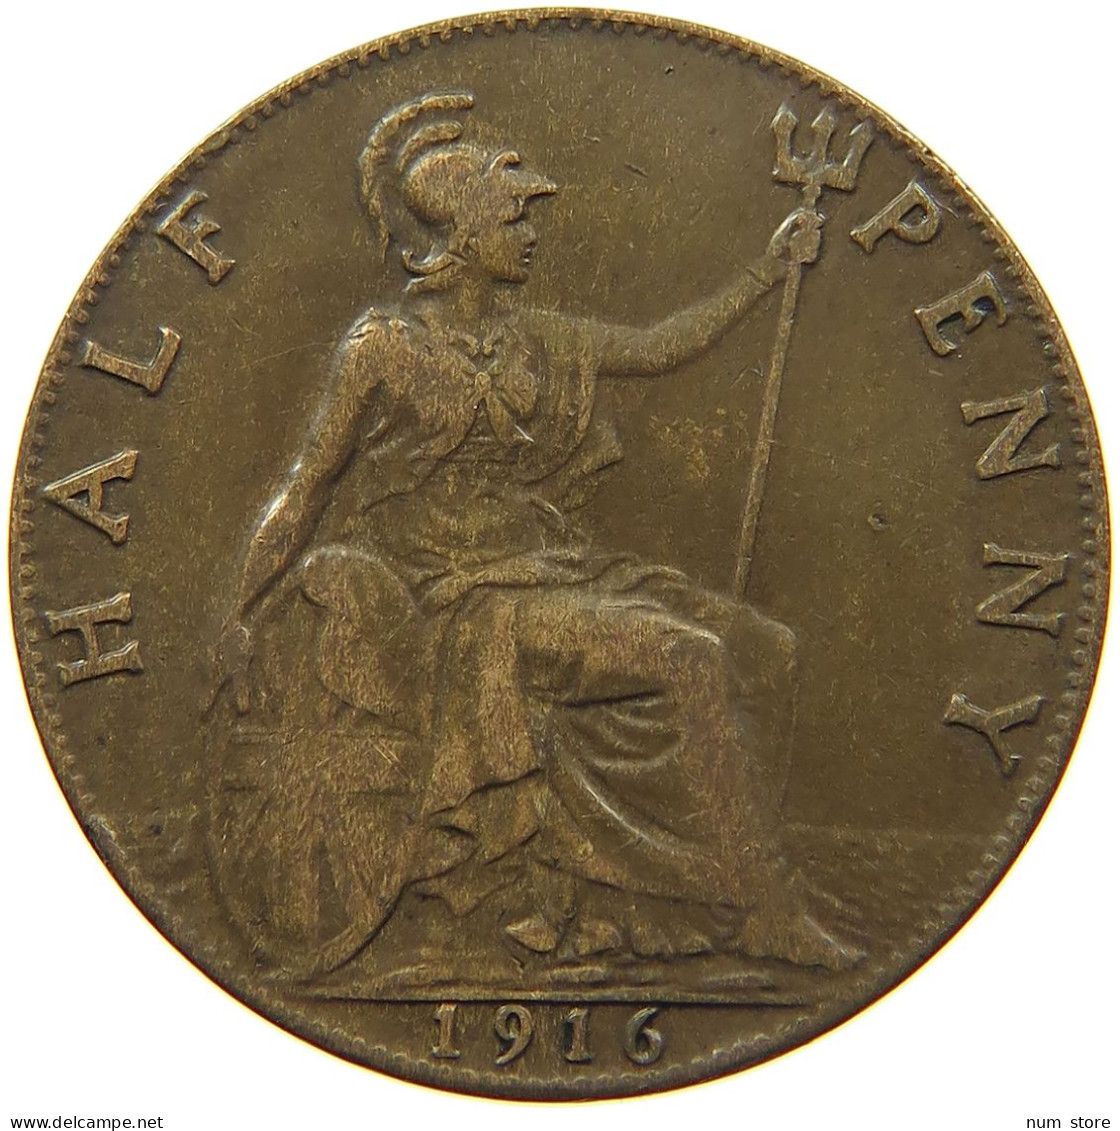 GREAT BRITAIN 1/2 PENNY 1916 GEORGE V. (1910-1936) #MA 101860 - C. 1/2 Penny